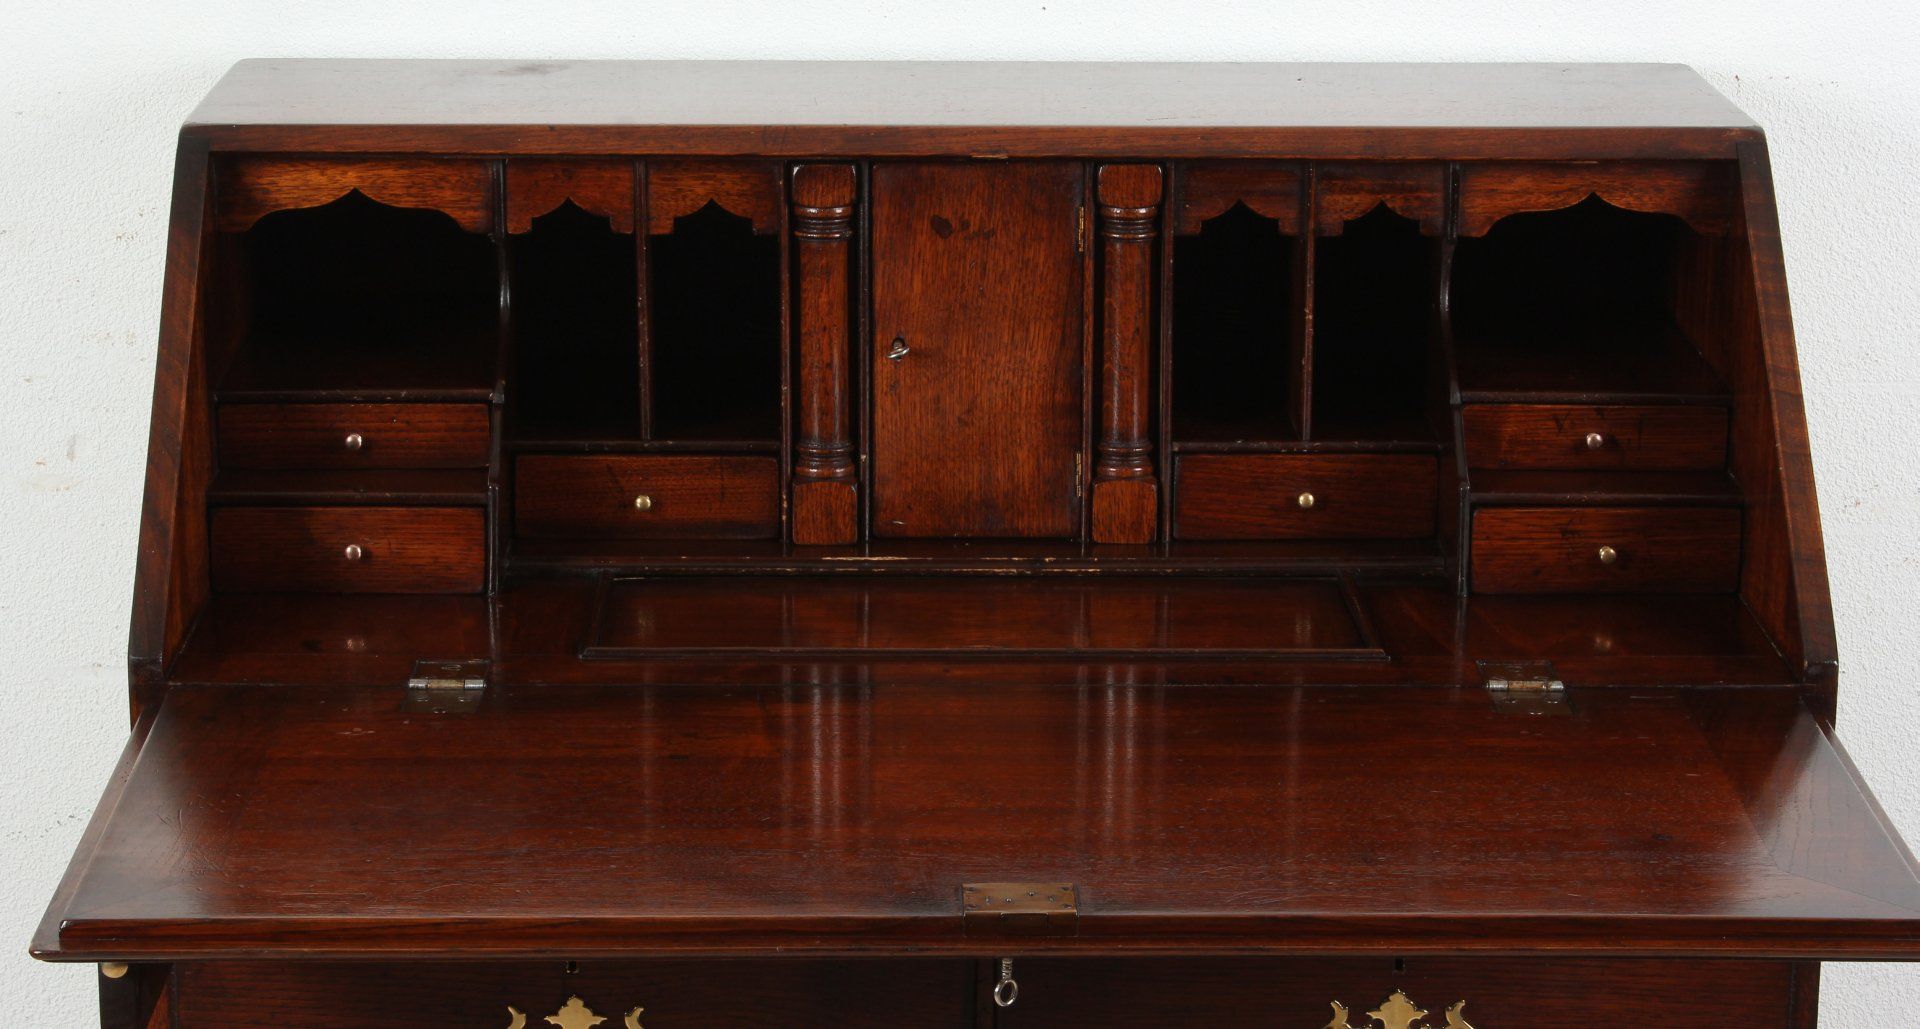 Beautiful English oak writesecretaire style furniture 20th century, in very good condition, nice - Image 2 of 2